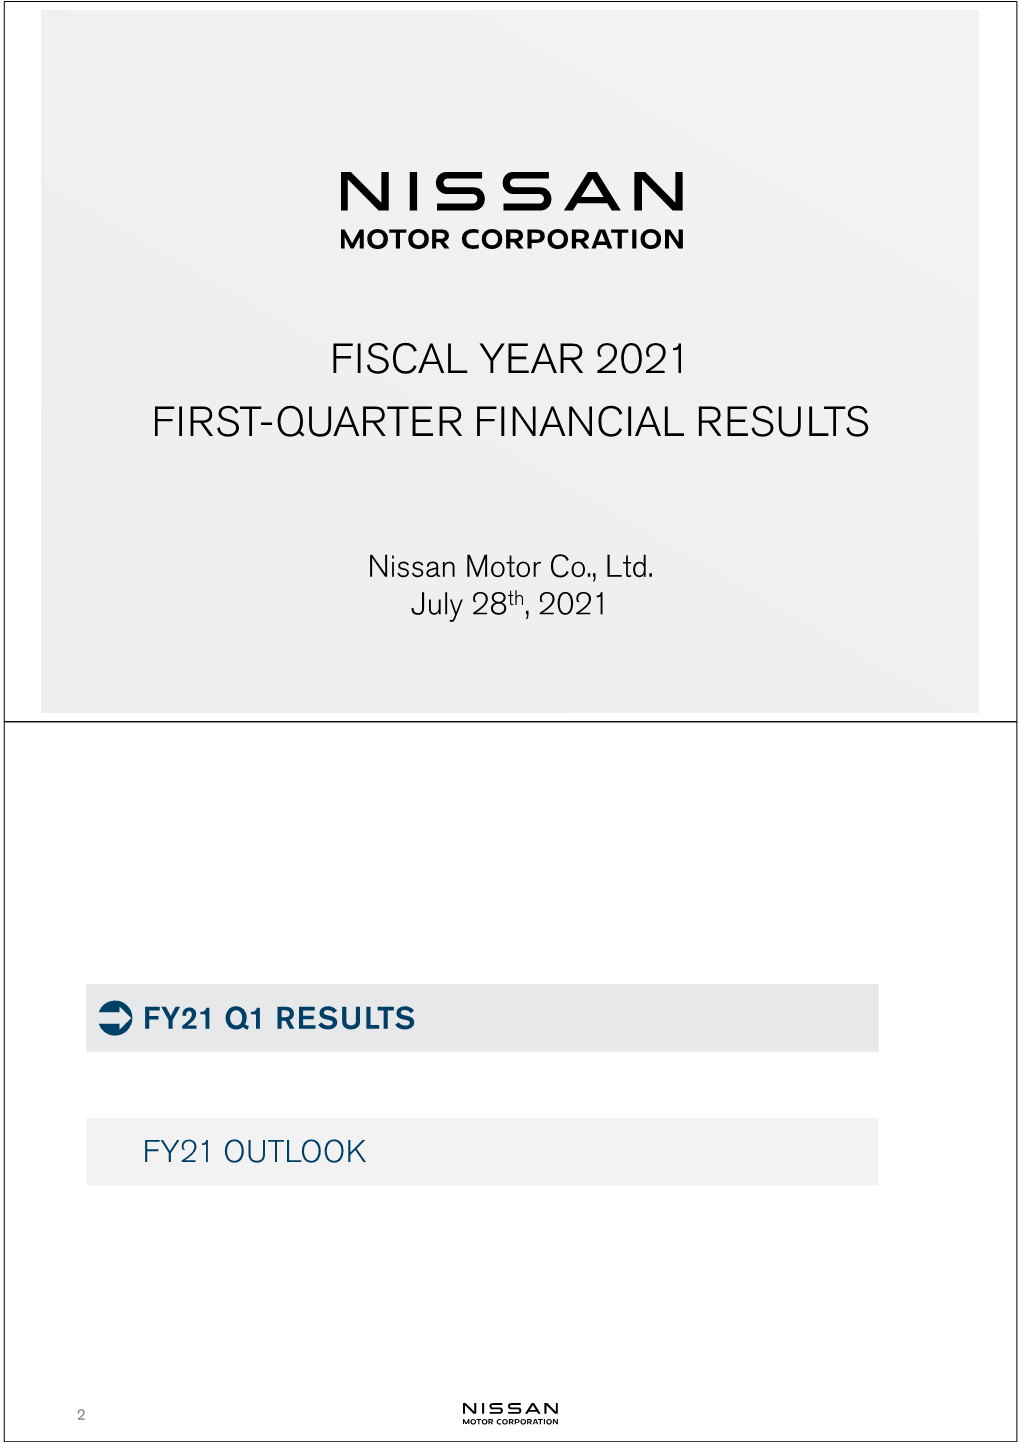 Fiscal Year 2021 First-Quarter Financial Results